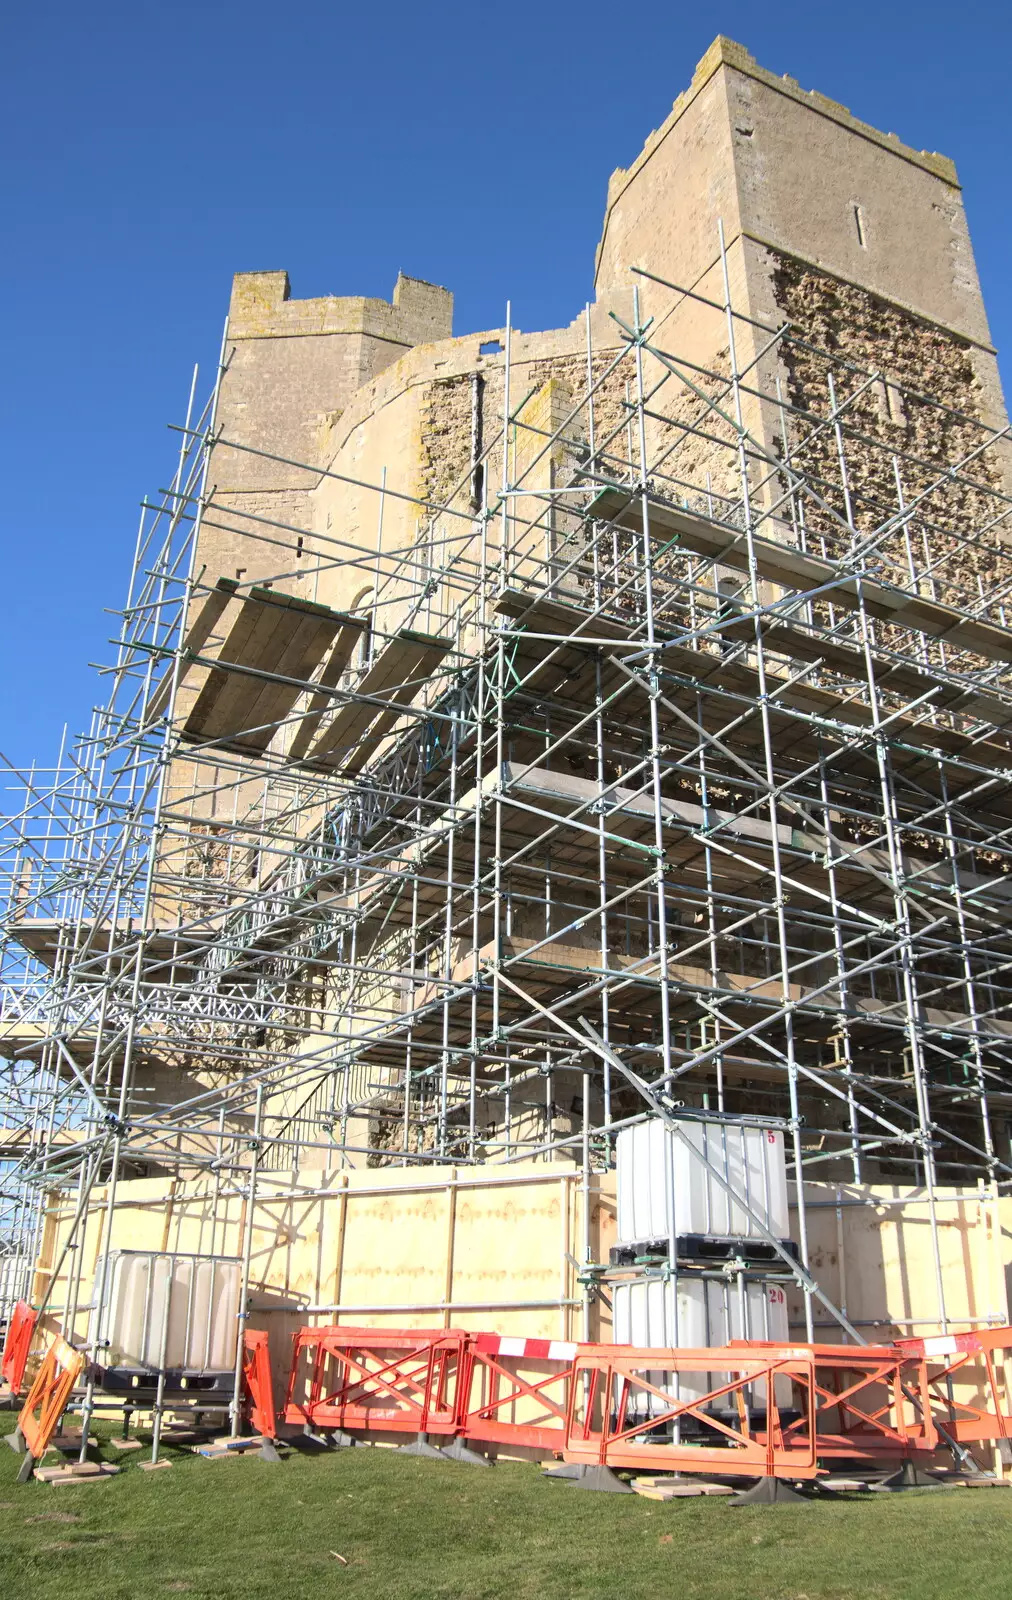 Orford Castle has a major scaffolding job on, from A Trip to Orford Castle, Orford, Suffolk - 26th February 2022